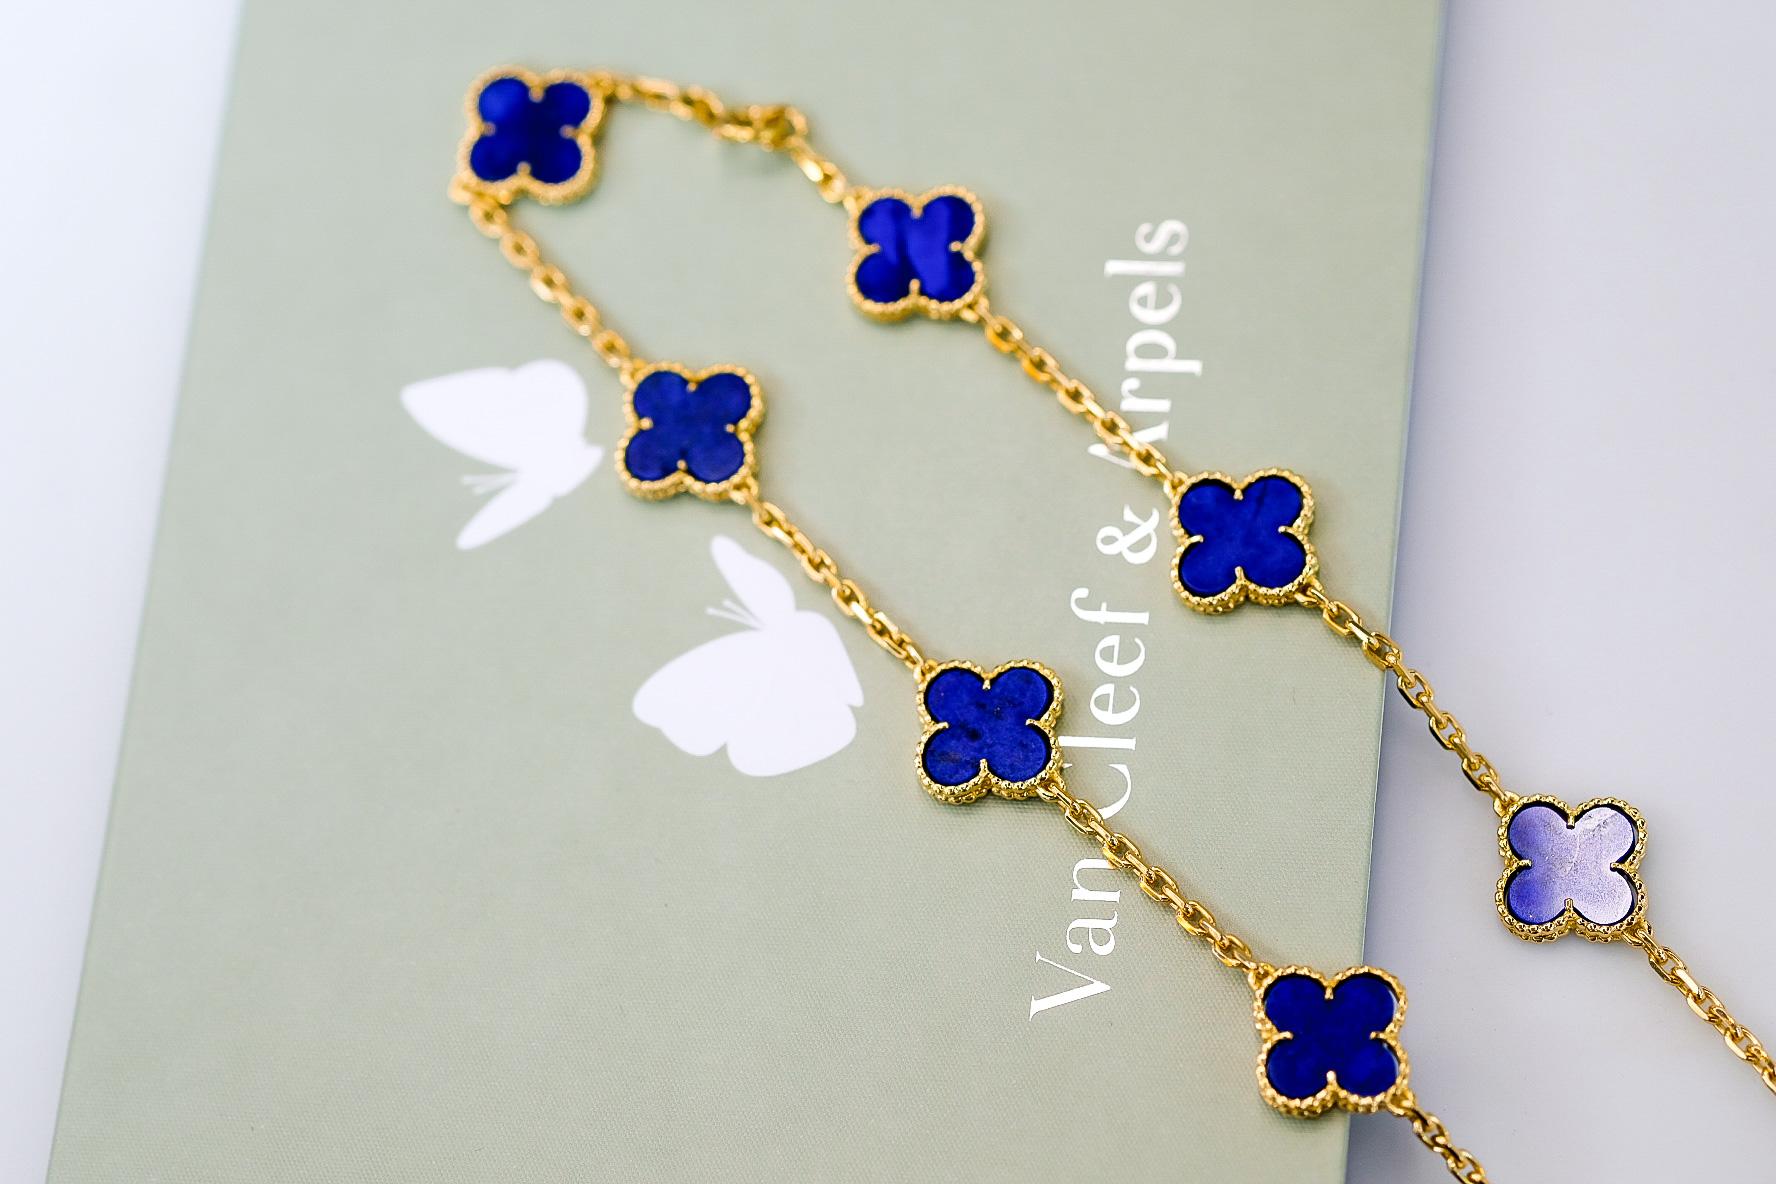 Van Cleef & Arpels 18K Yellow 10 Motif Gold Alhambra Blue Lapis Necklace In Excellent Condition For Sale In New York, NY